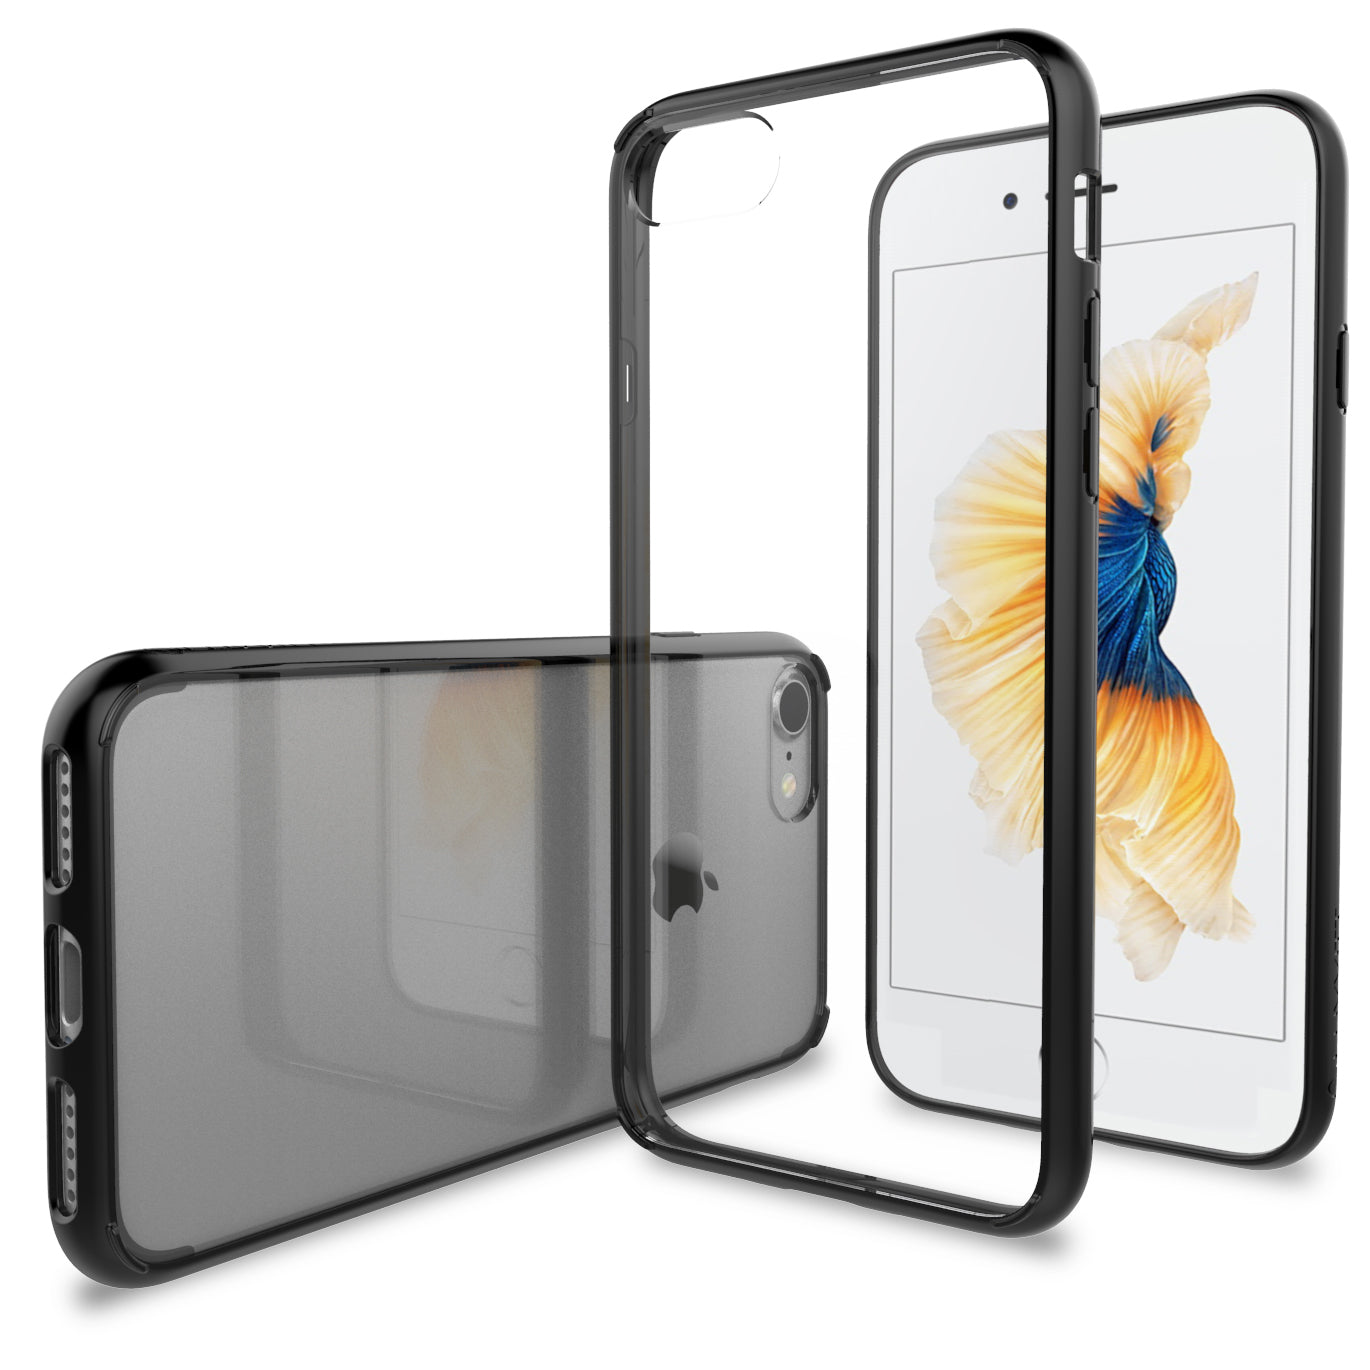 Luvvitt Clear View Hybrid Case for Apple iPhone SE 2020 and iPhone 7 and 8 - Black